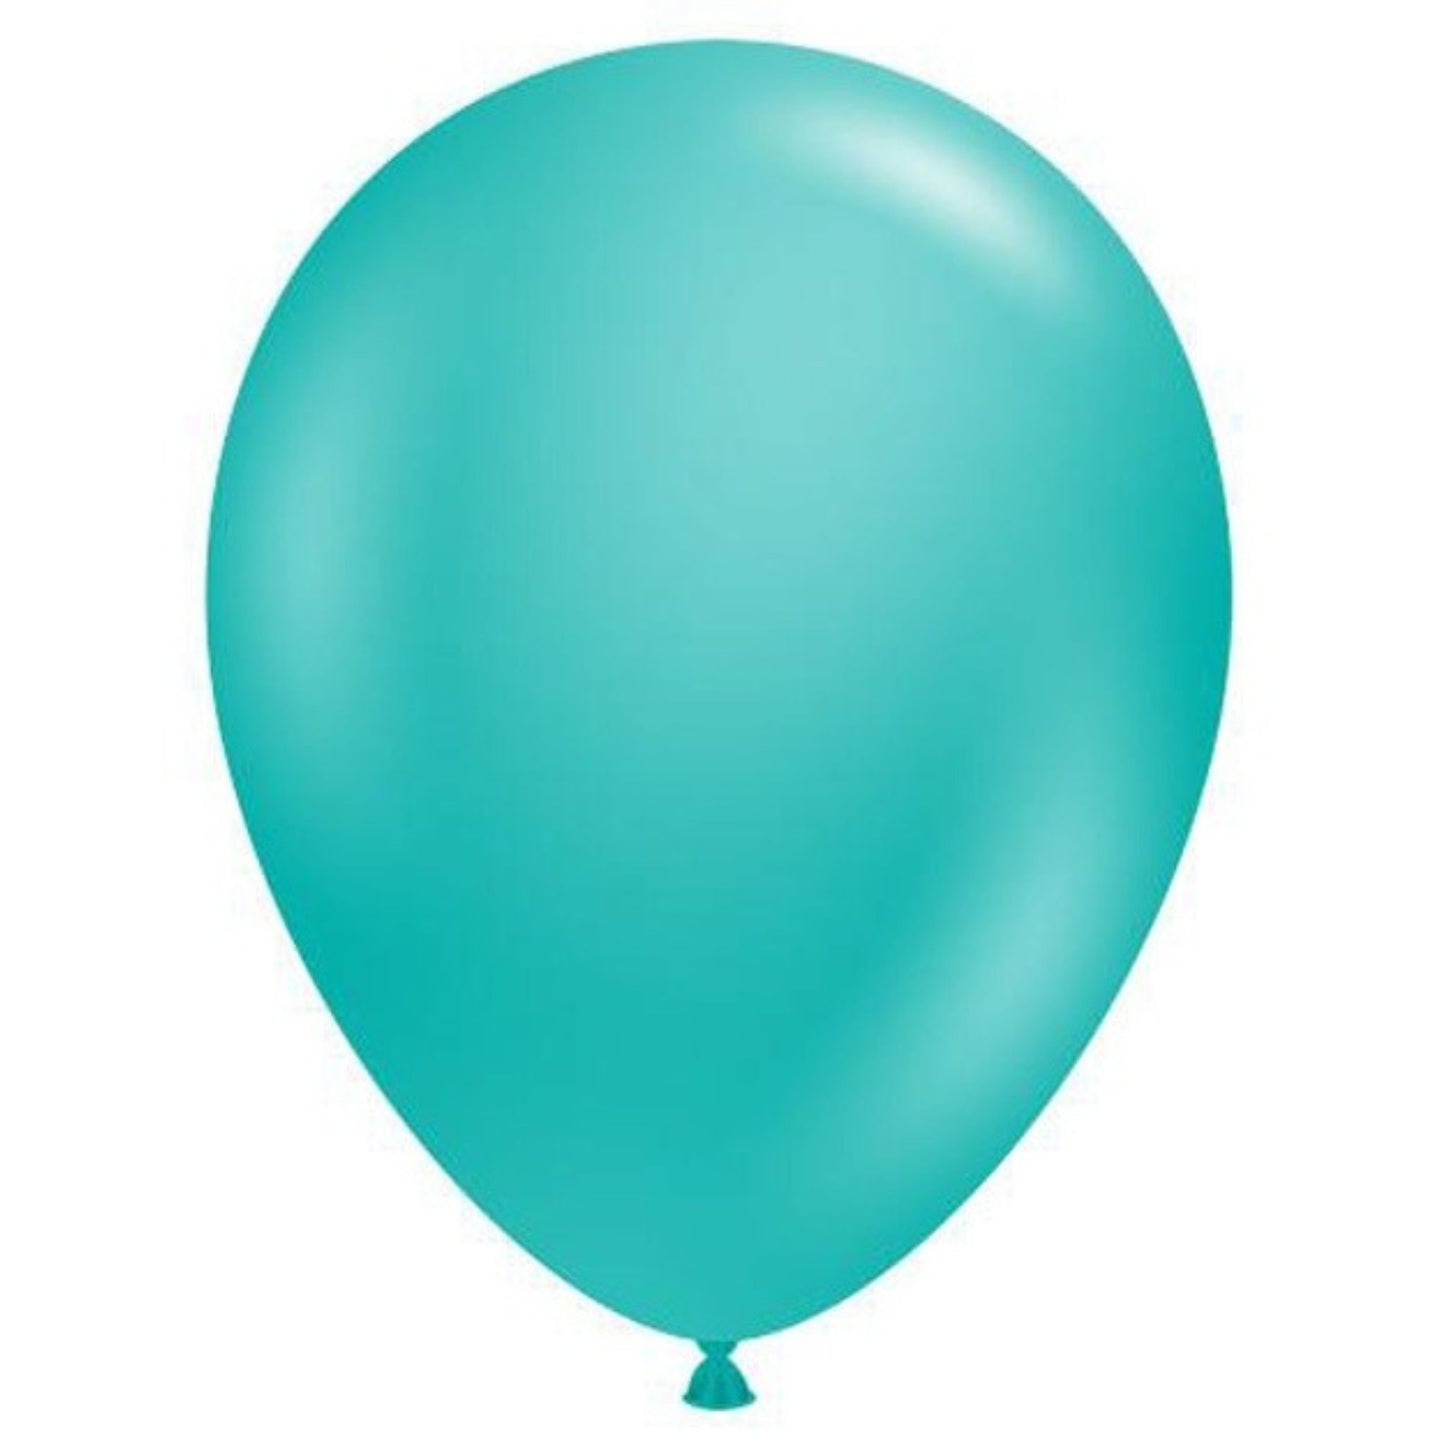 11 inch helium filled Teal latex balloon